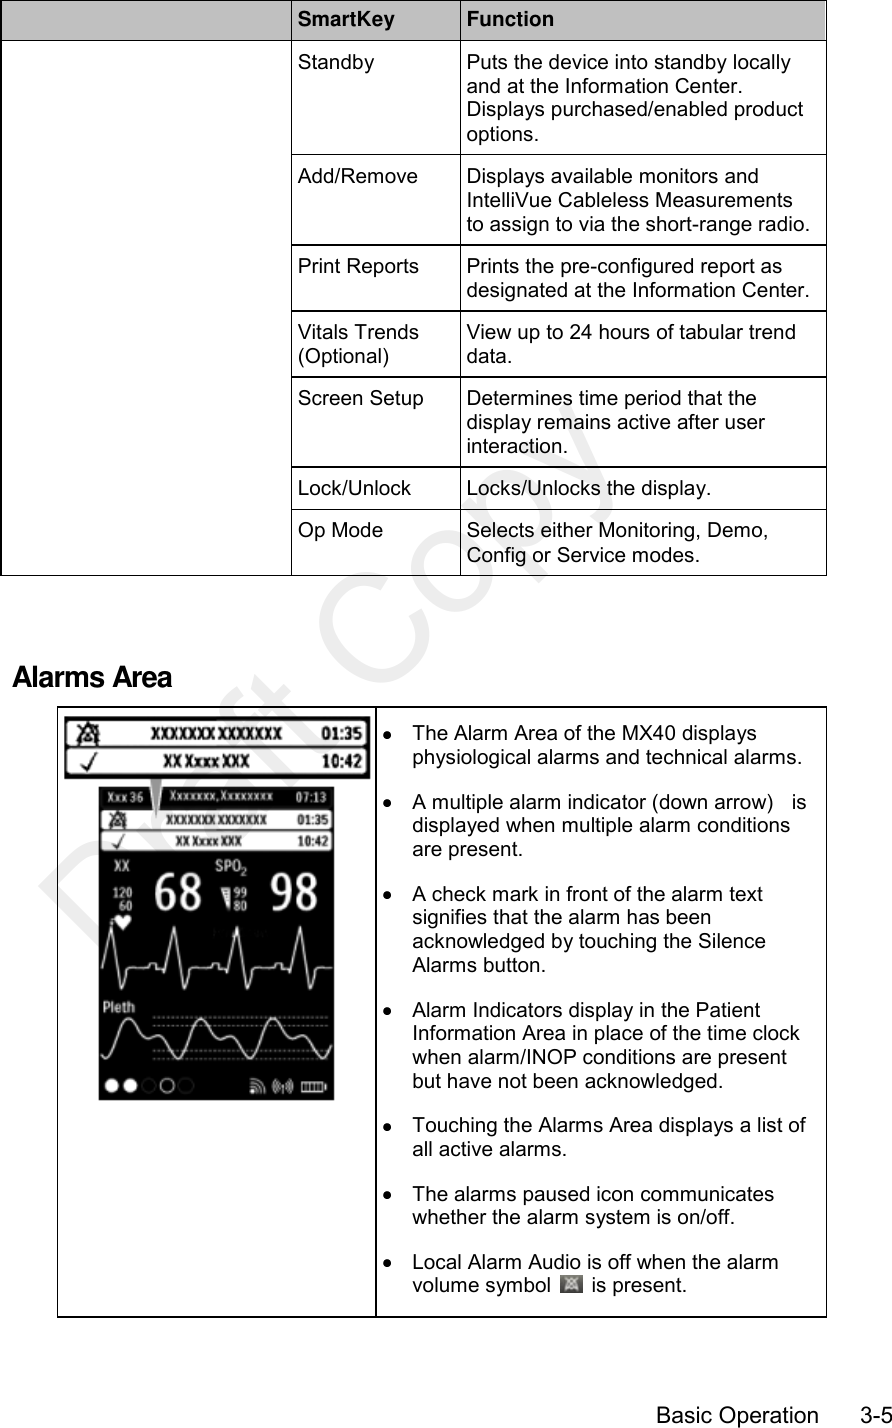      Basic Operation      3-5    SmartKey Function  Standby Puts the device into standby locally and at the Information Center. Displays purchased/enabled product options.  Add/Remove Displays available monitors and IntelliVue Cableless Measurements to assign to via the short-range radio.  Print Reports Prints the pre-configured report as designated at the Information Center.  Vitals Trends (Optional) View up to 24 hours of tabular trend data.  Screen Setup Determines time period that the display remains active after user interaction.  Lock/Unlock Locks/Unlocks the display.  Op Mode Selects either Monitoring, Demo, Config or Service modes.   Alarms Area    The Alarm Area of the MX40 displays physiological alarms and technical alarms.   A multiple alarm indicator (down arrow)    is displayed when multiple alarm conditions are present.    A check mark in front of the alarm text signifies that the alarm has been acknowledged by touching the Silence Alarms button.   Alarm Indicators display in the Patient Information Area in place of the time clock when alarm/INOP conditions are present but have not been acknowledged.   Touching the Alarms Area displays a list of all active alarms.   The alarms paused icon communicates whether the alarm system is on/off.   Local Alarm Audio is off when the alarm volume symbol    is present.  Draft Copy